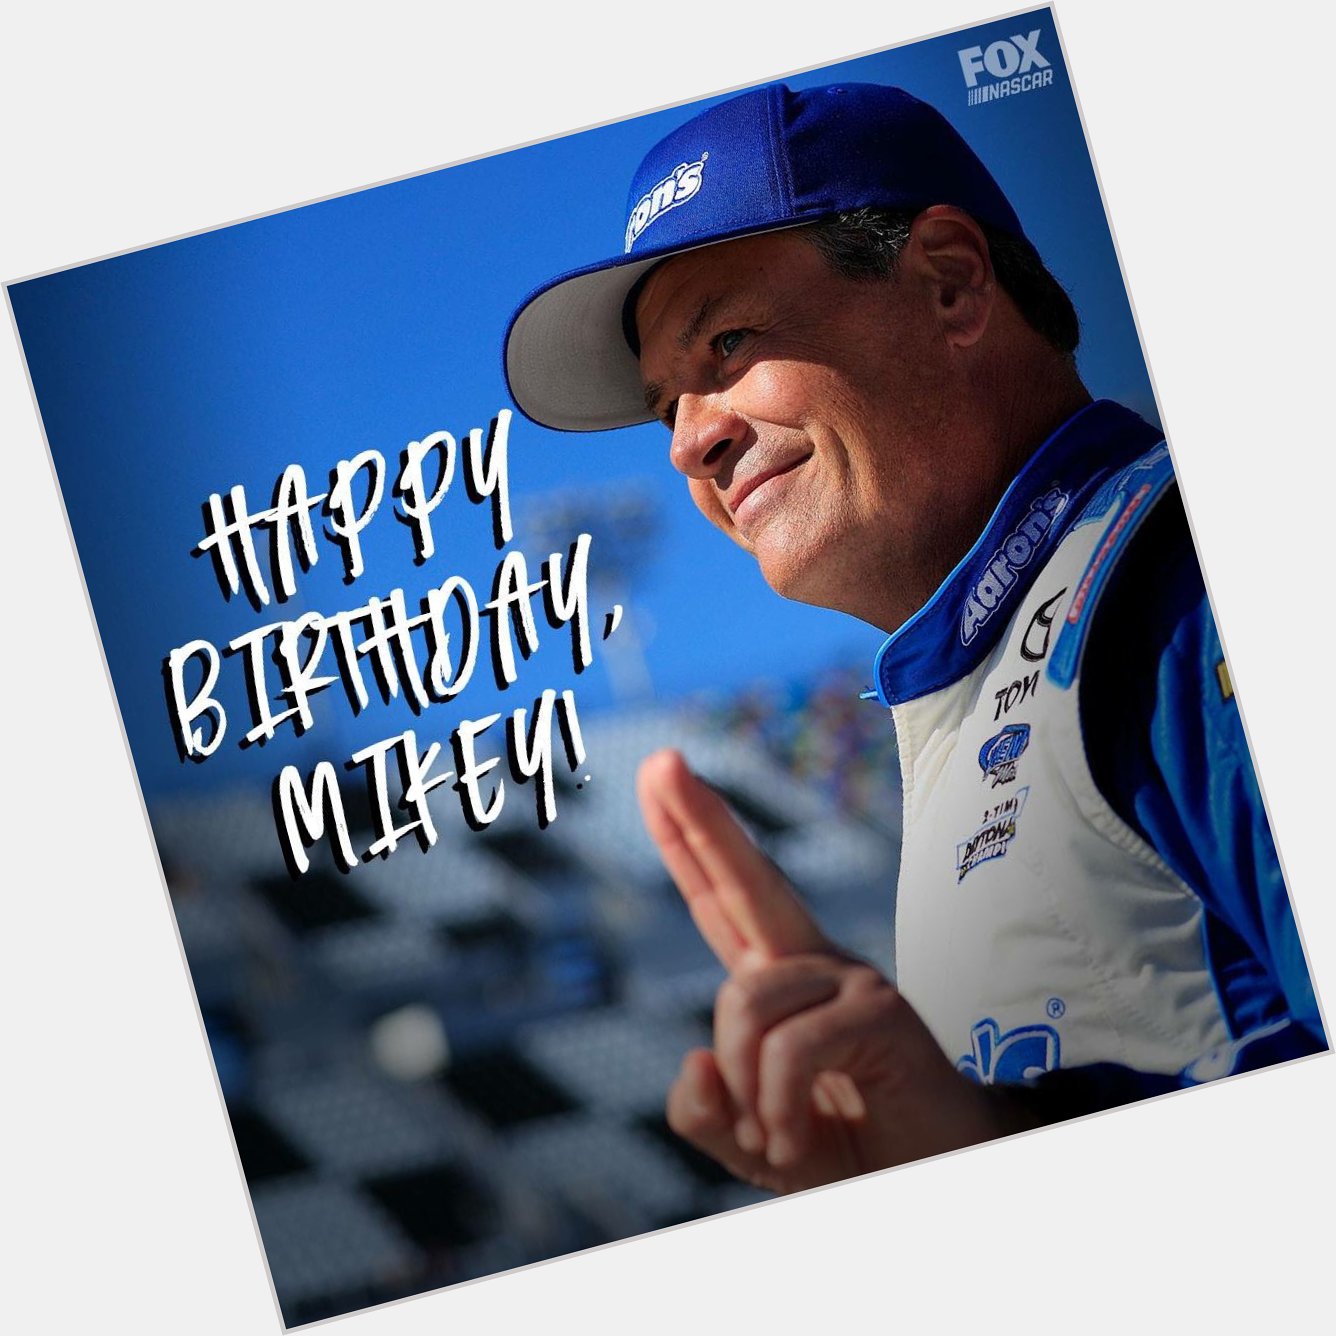 Happy 55th Mikey! 784 Starts. 4 Wins. 41 Top 5s. 133 Top 10s. Happy Birthday, Michael Waltrip! 